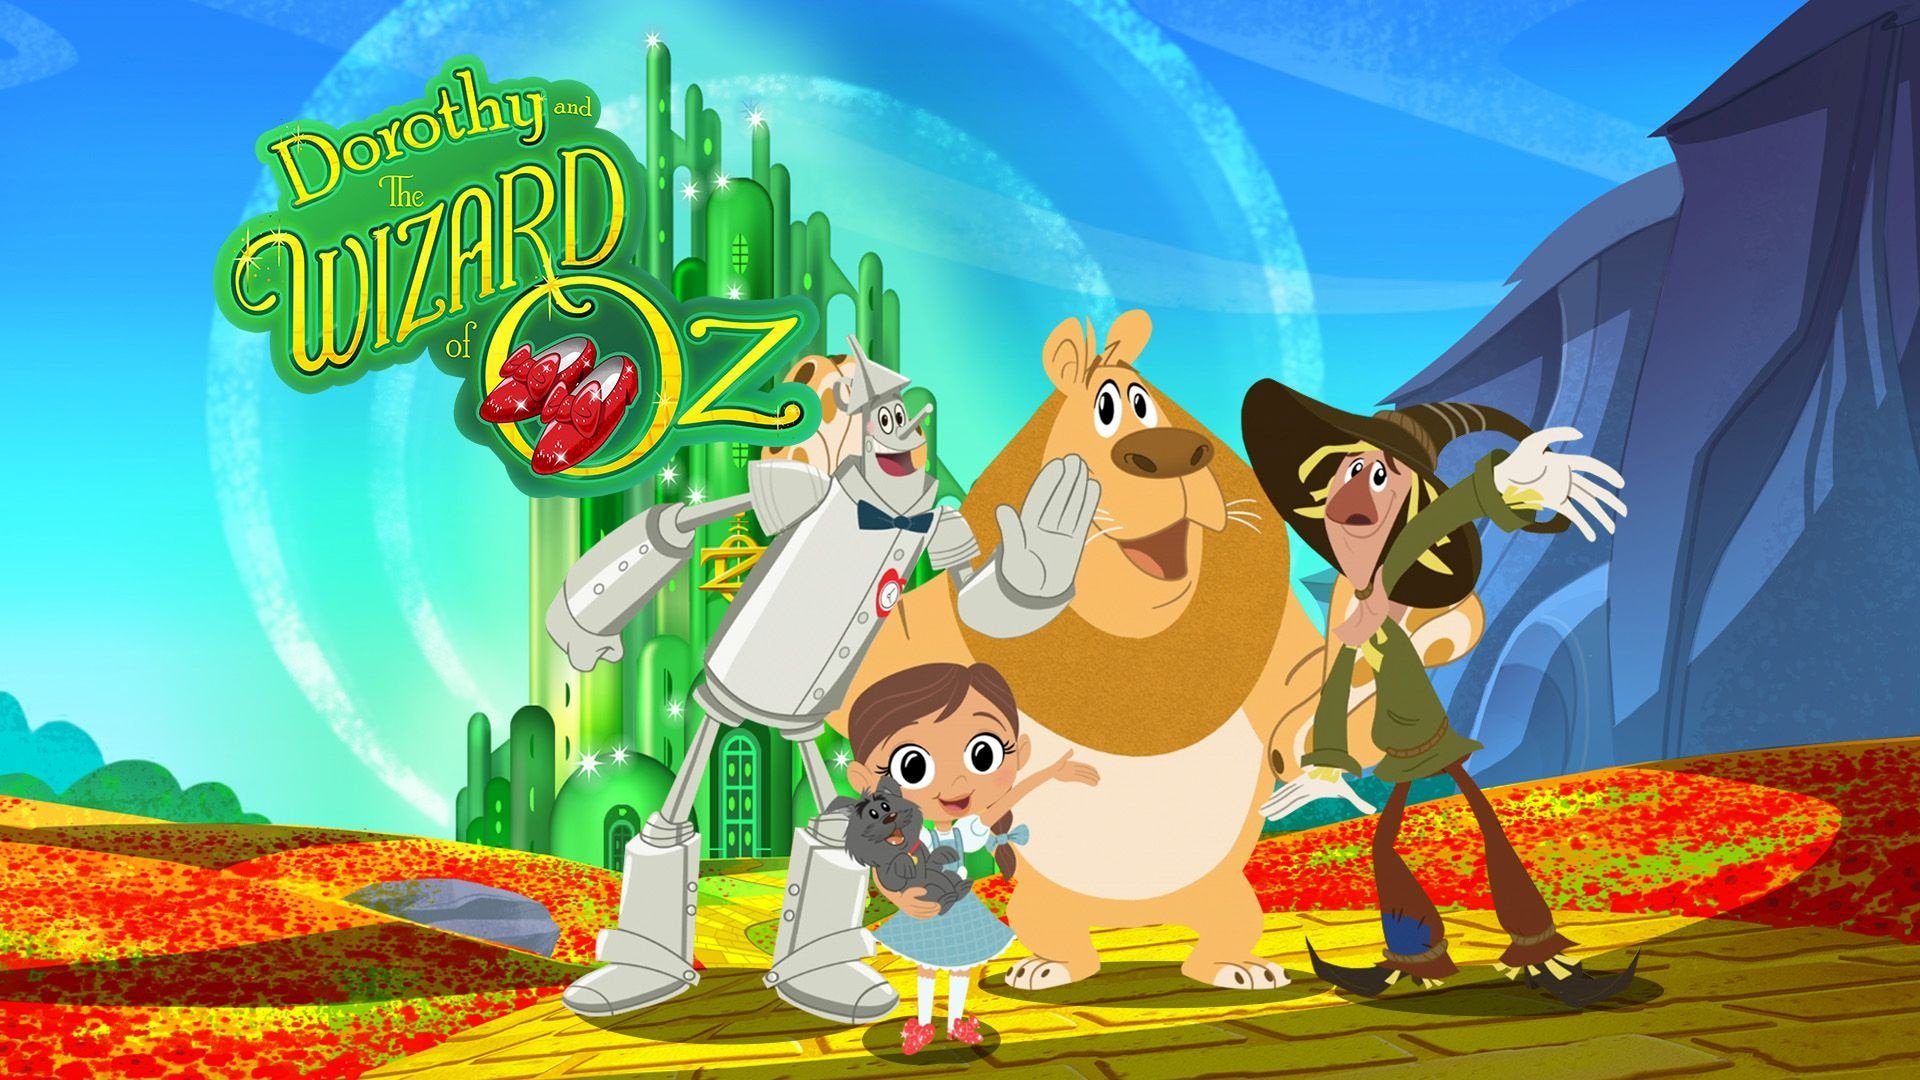 Watch Dorothy and the Wizard of Oz Online - Stream Full Episodes